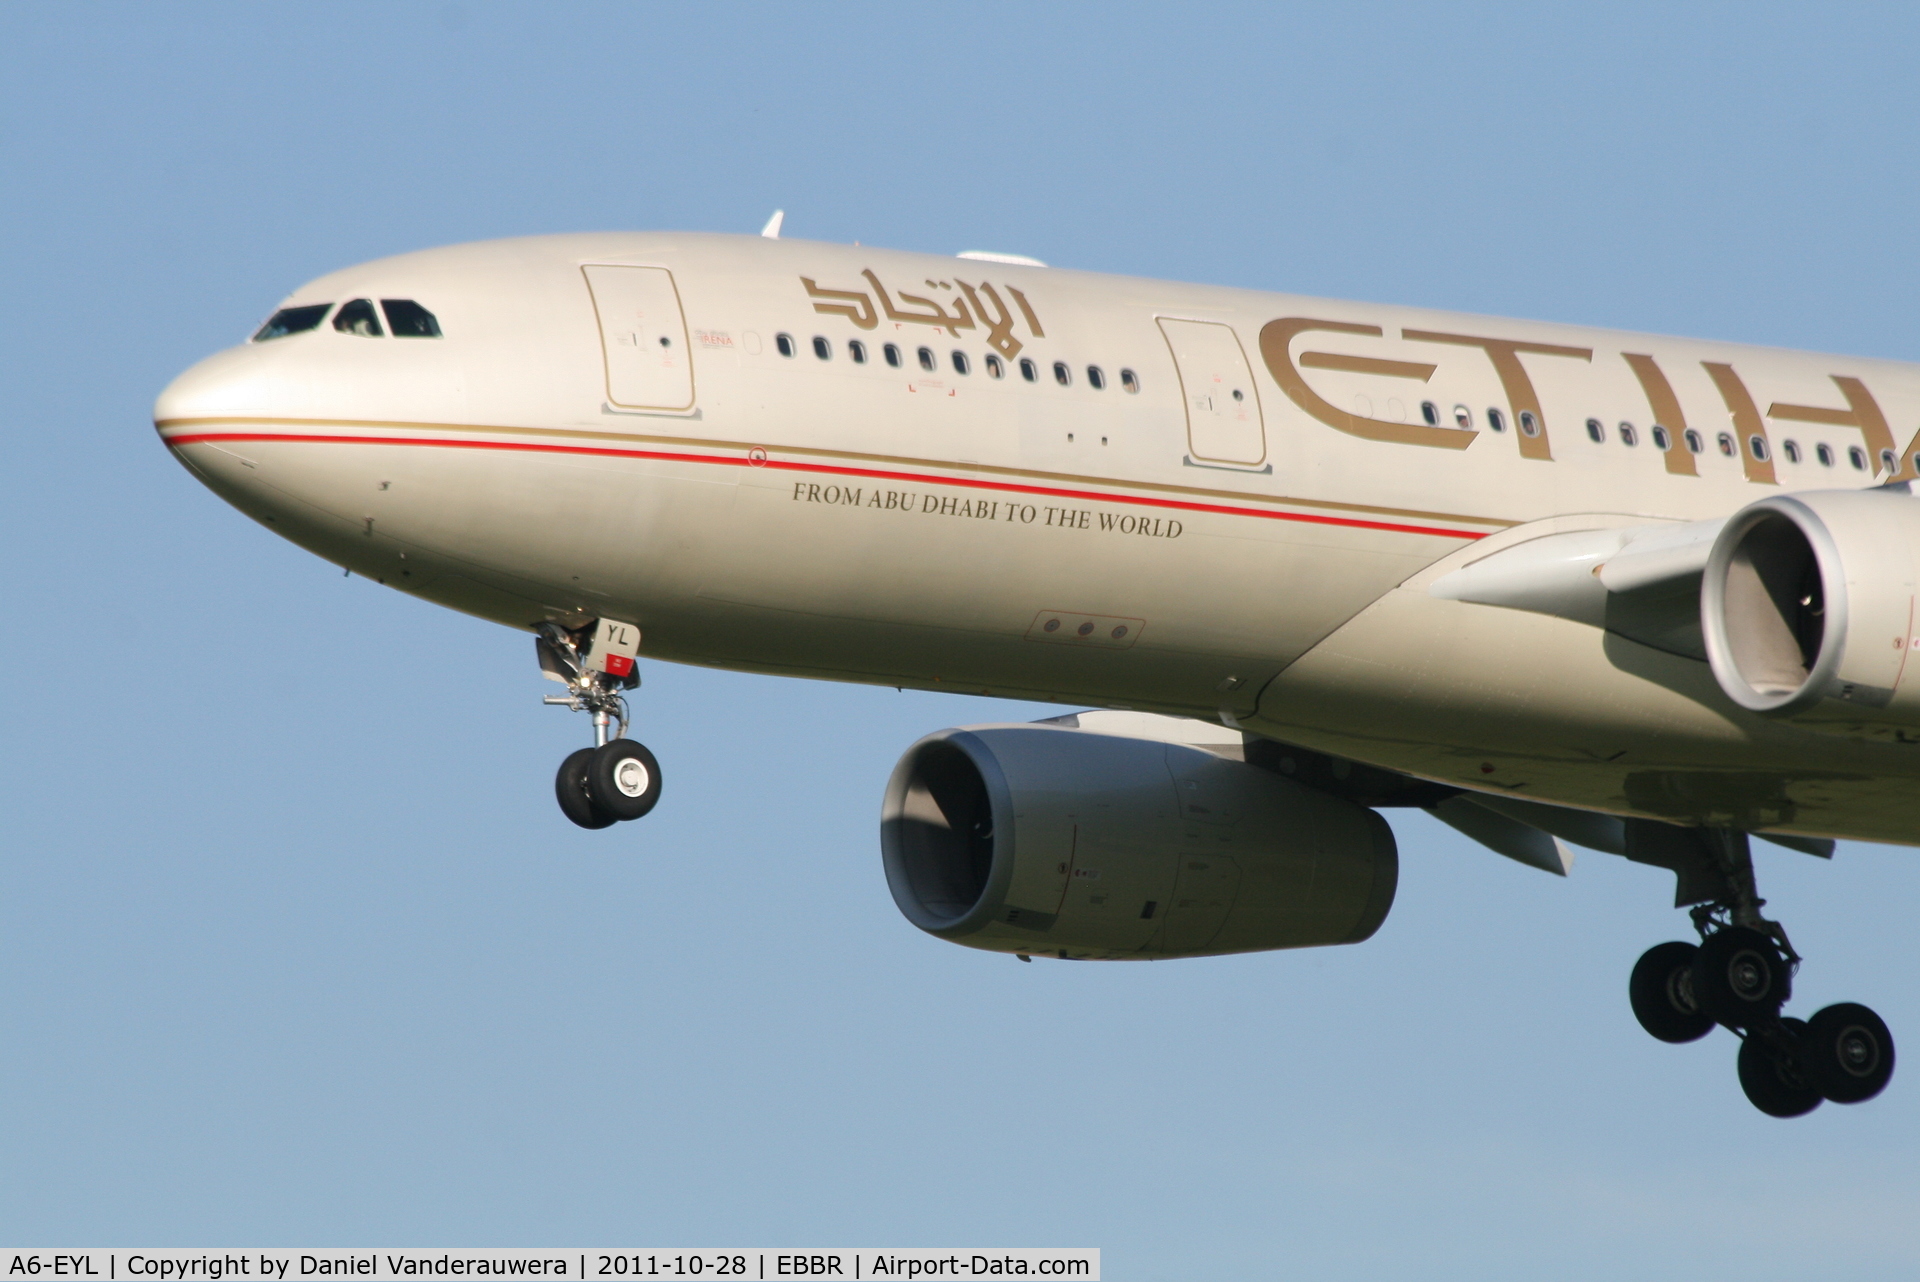 A6-EYL, 2006 Airbus A330-243 C/N 809, Arrival of flight EY055 to RWY 25L